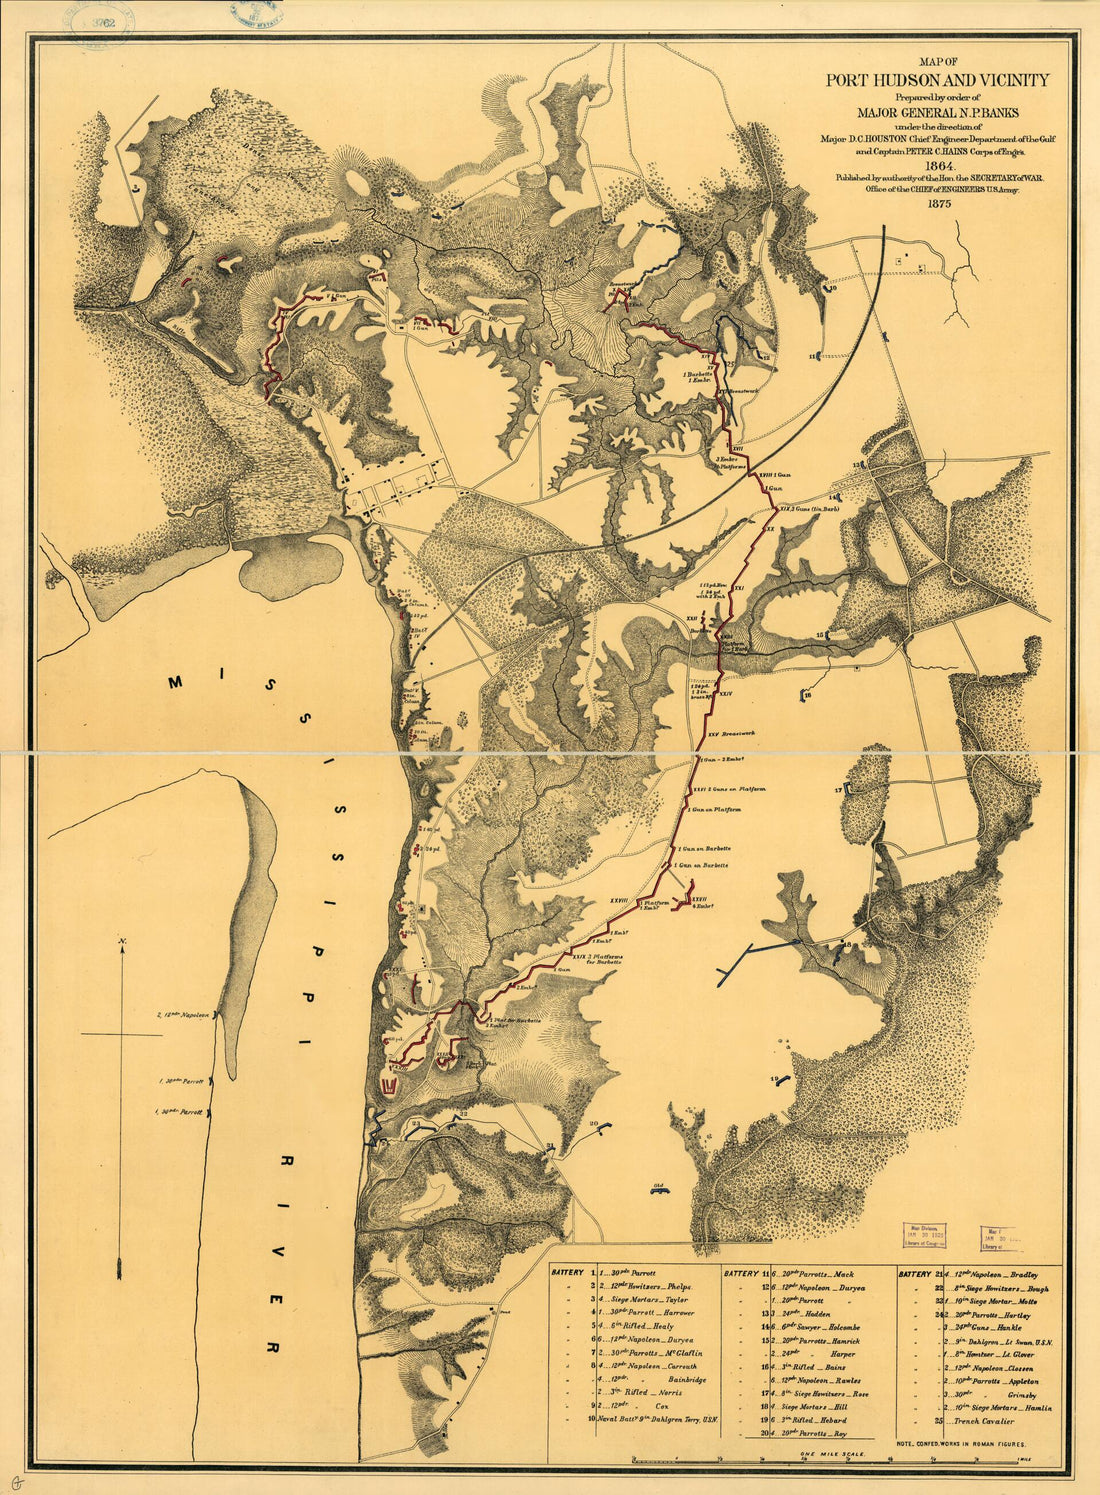 This old map of Map of Port Hudson and Vicinity from 1875 was created by Peter C. Hains, D. C. (David Crawford) Houston in 1875